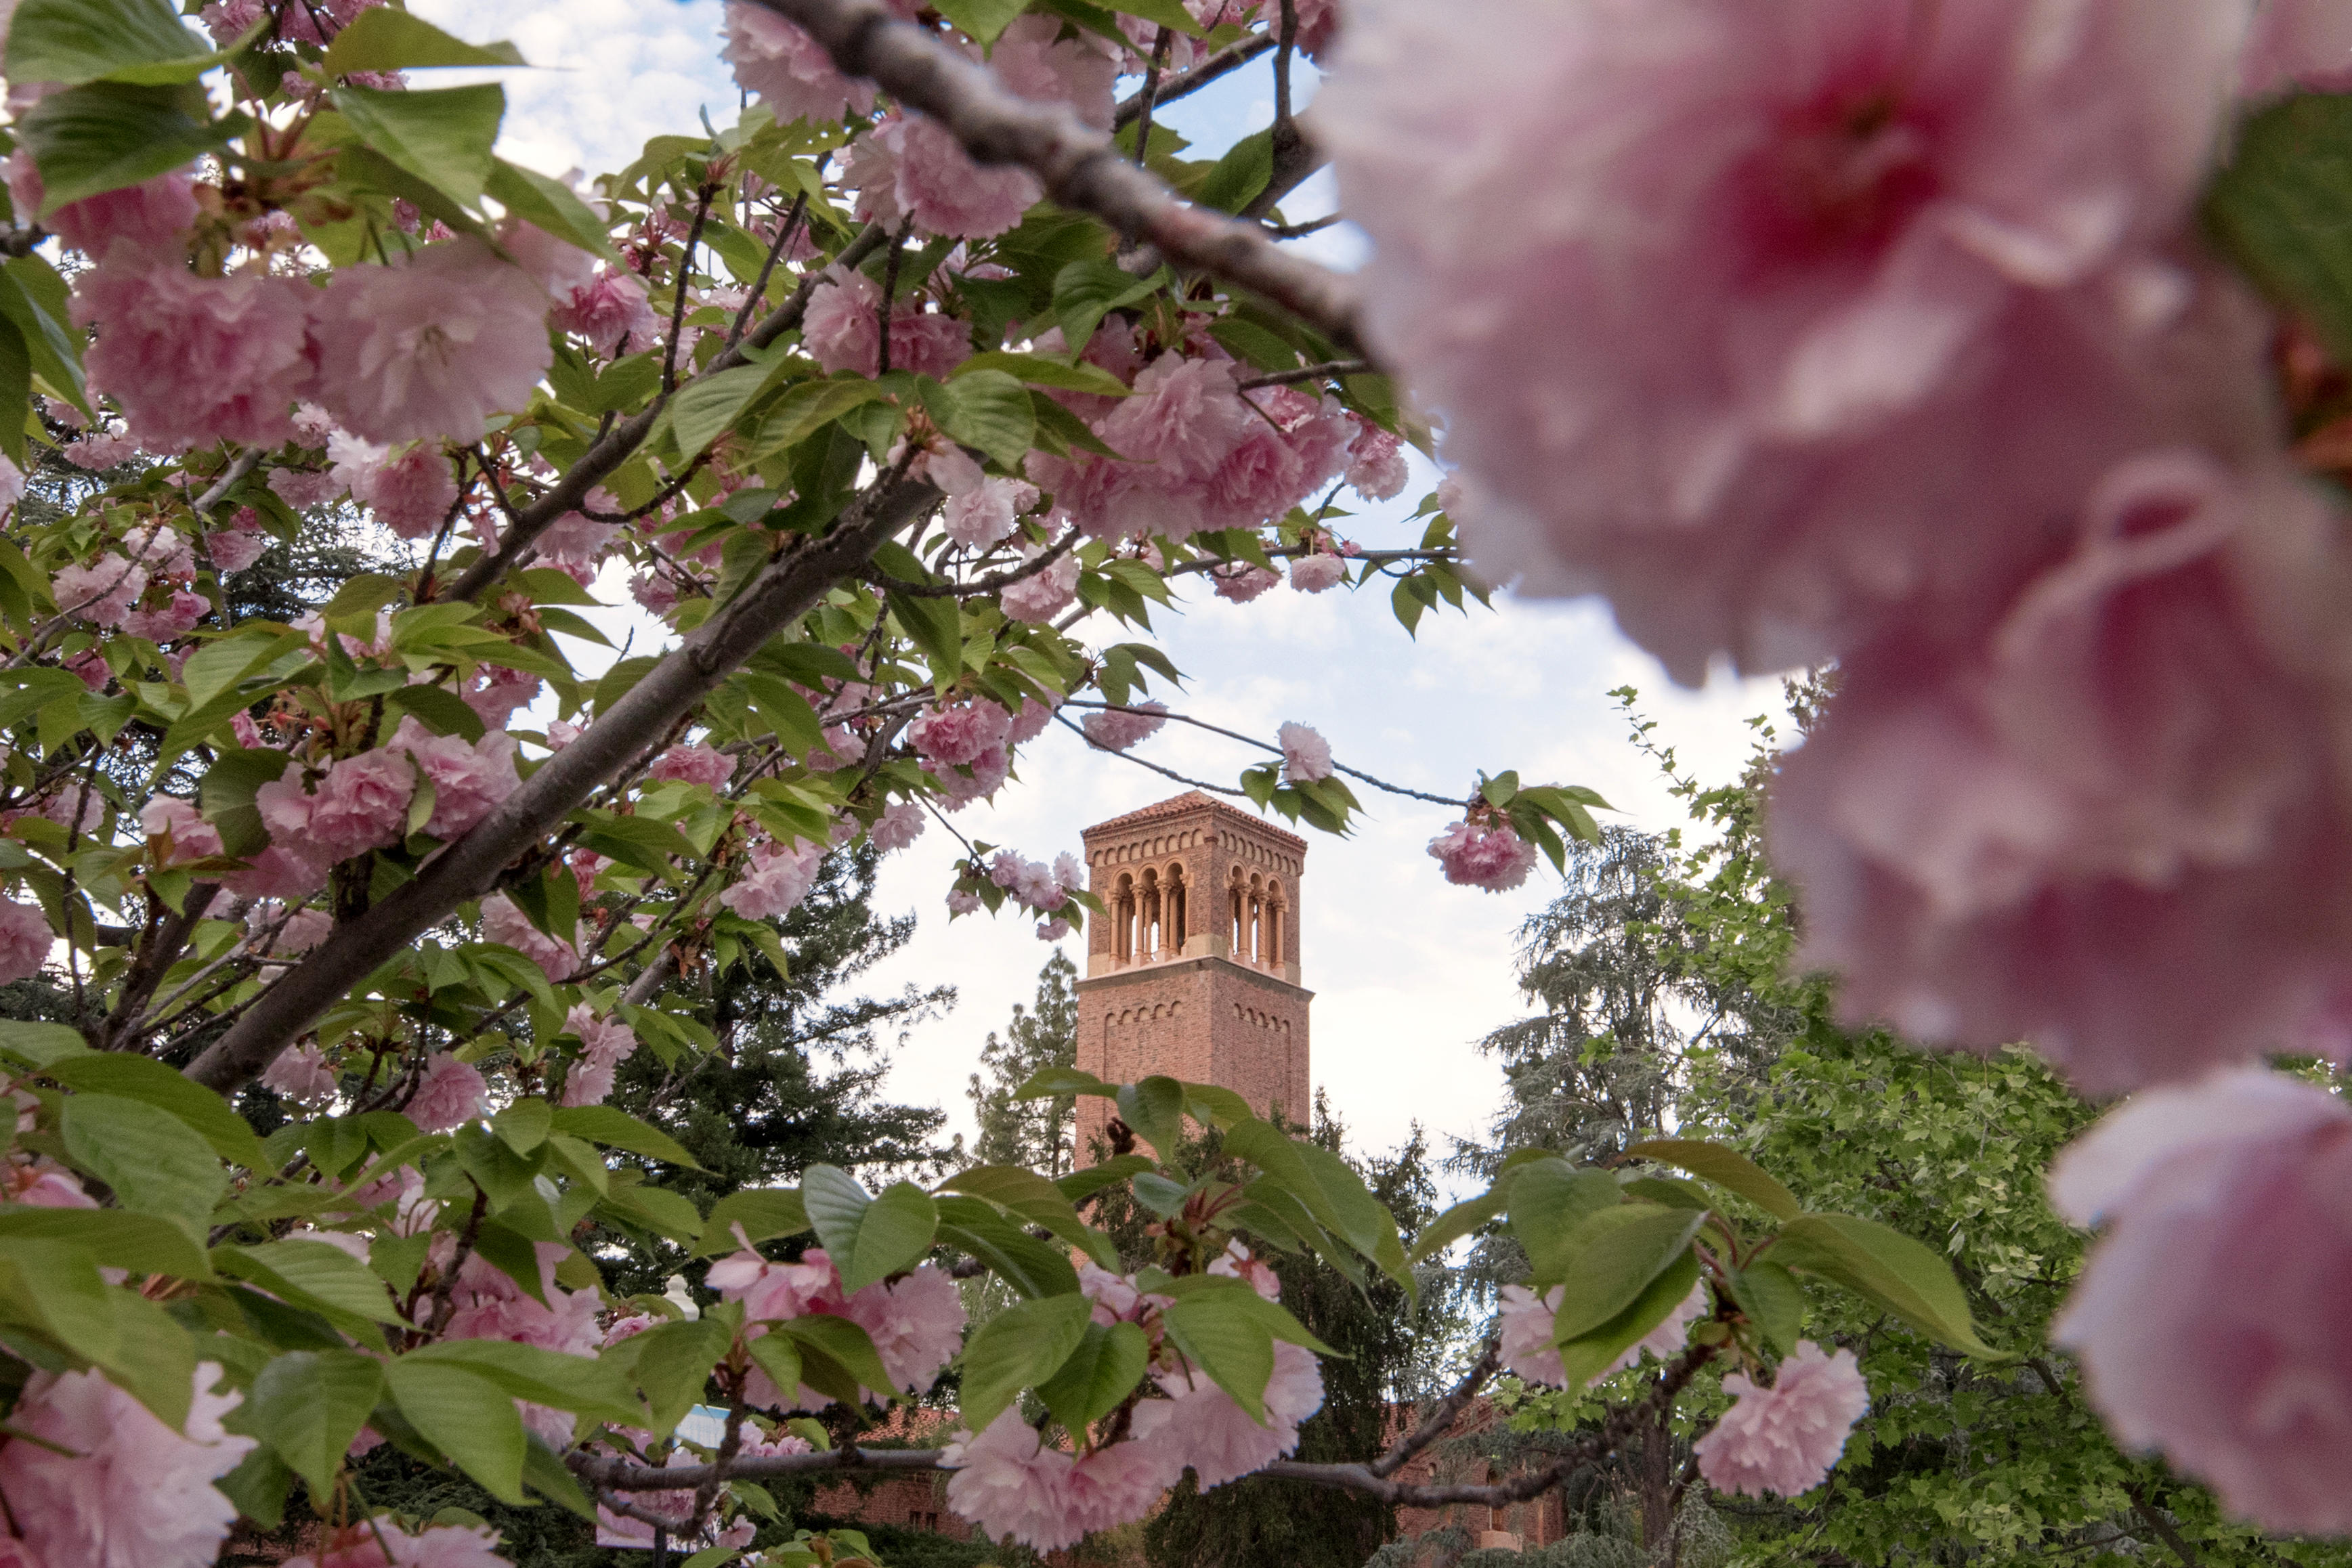 The Trinity Hall bell tower is seen through a burst of pink petals and bright greenery.